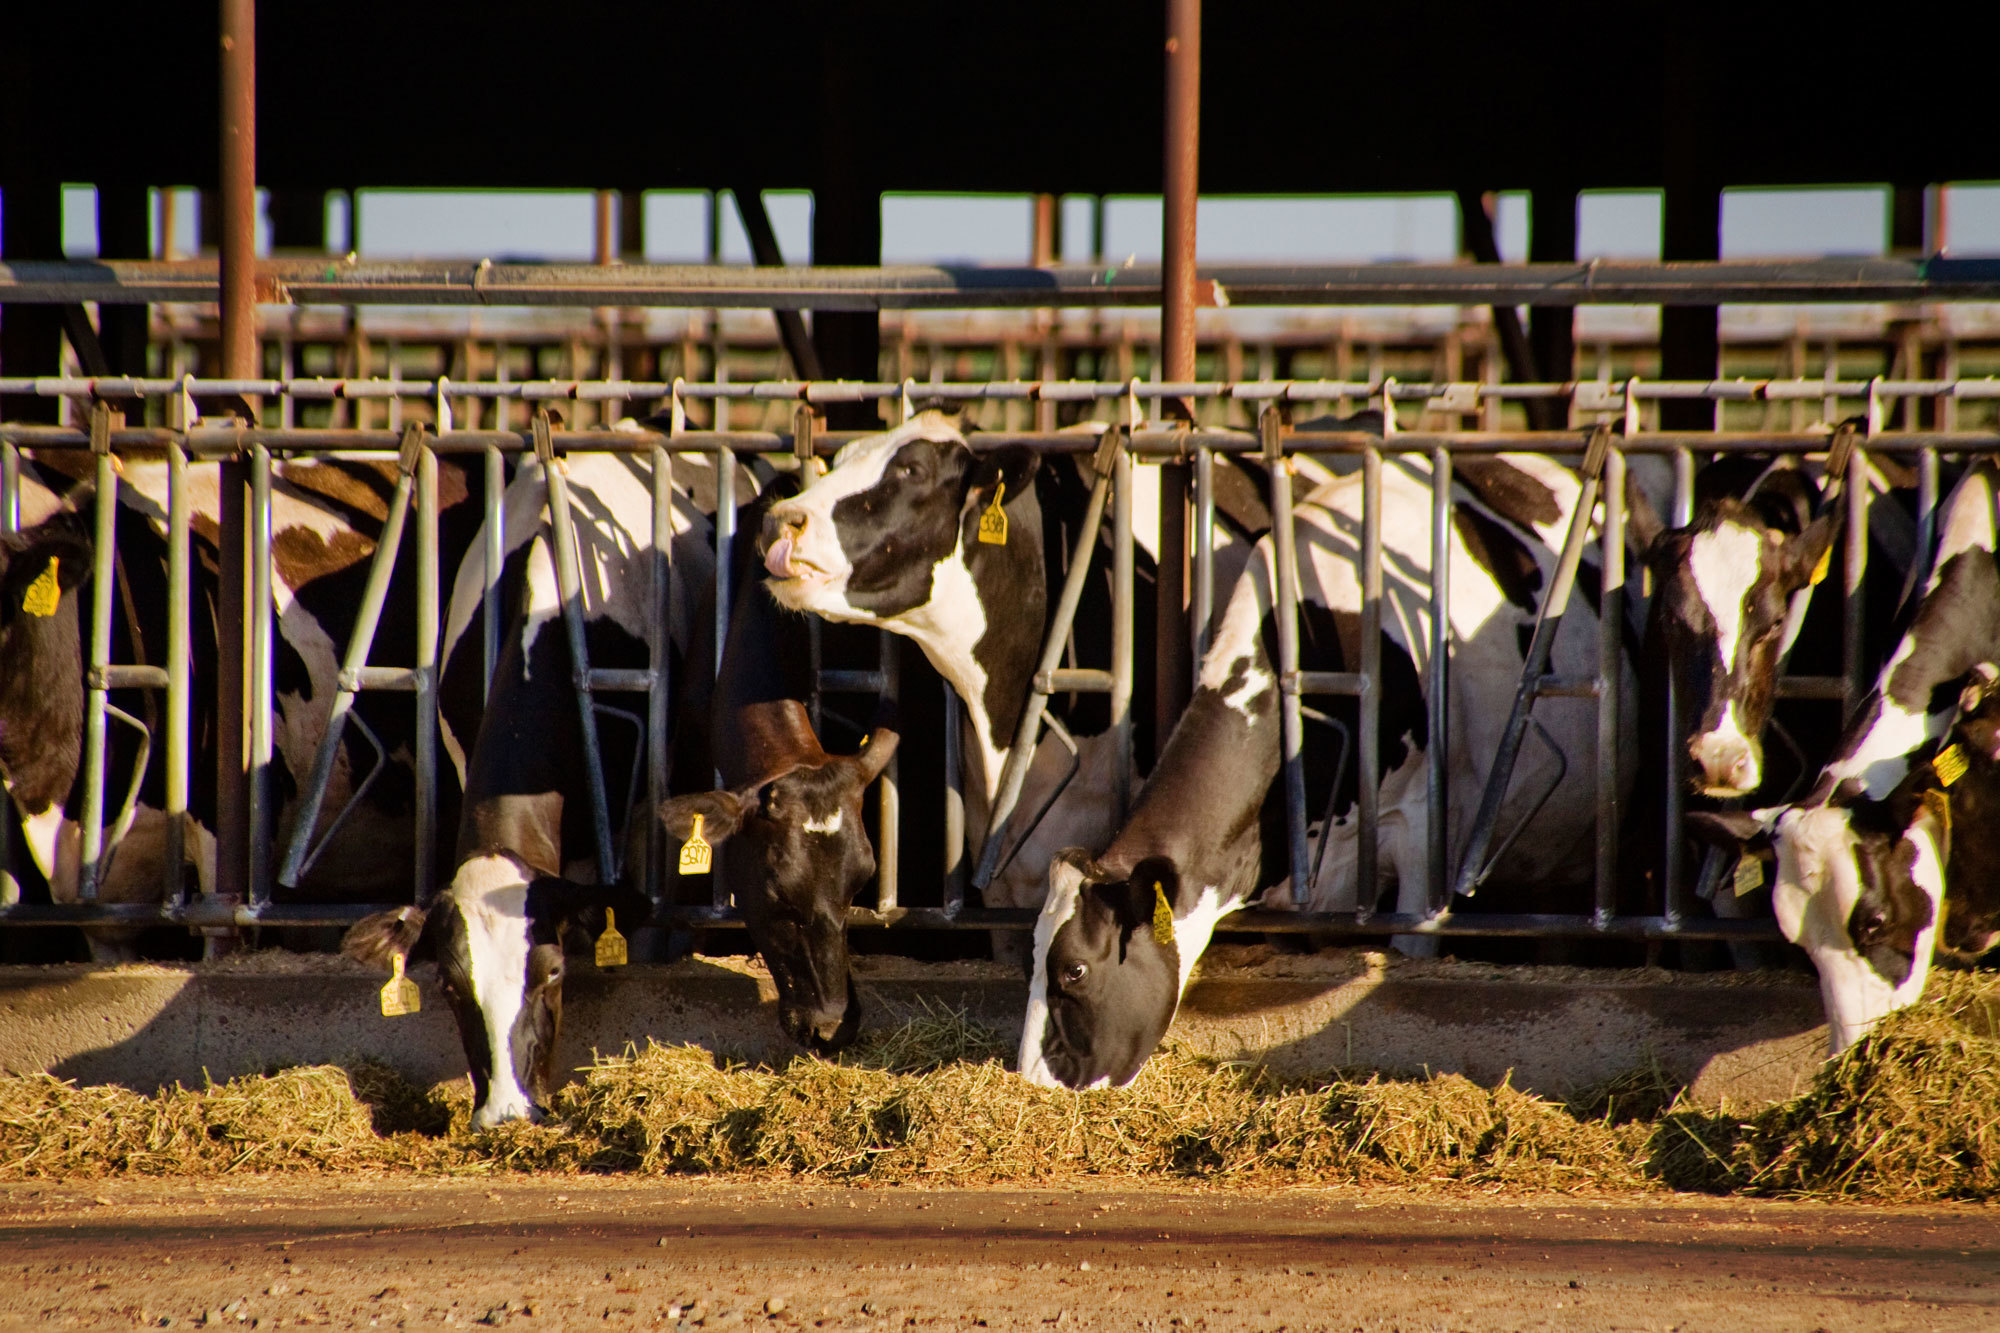 How Eating Seaweed Can Help Cows to Belch Less Methane - Yale E360